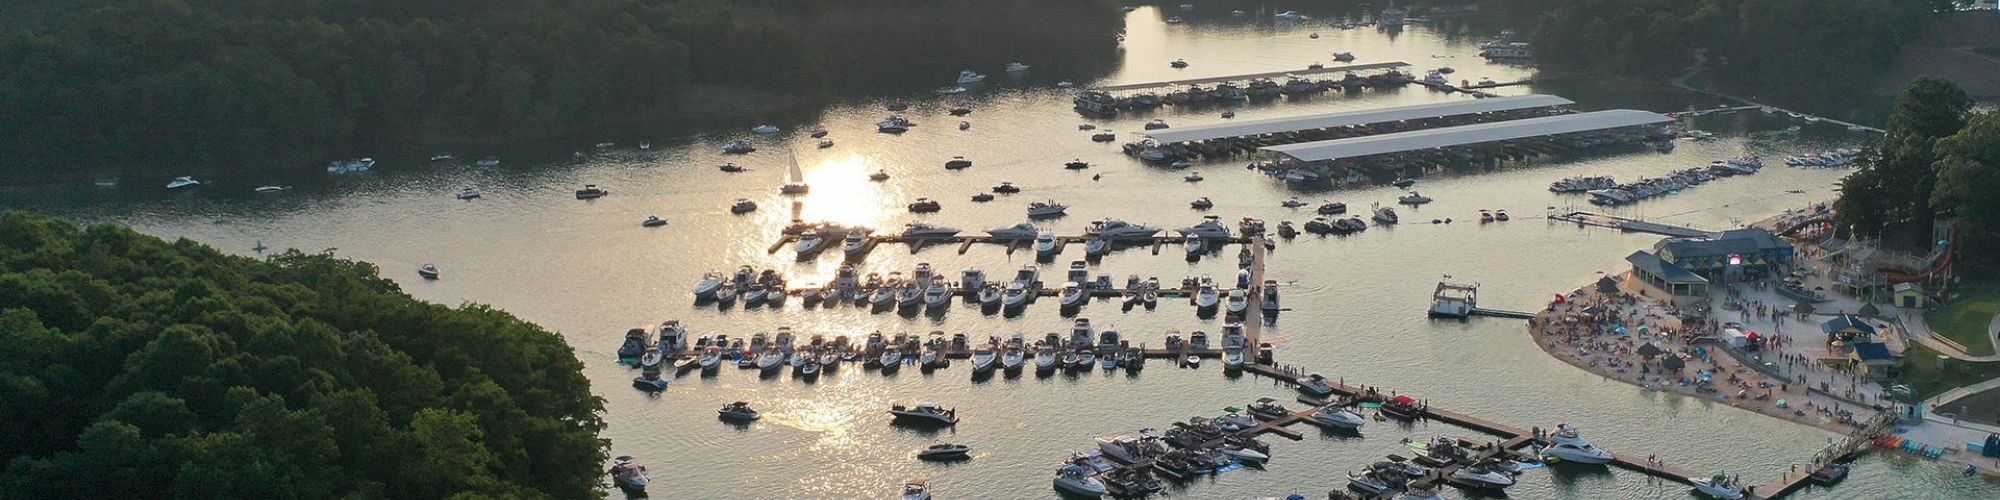 The image shows a marina filled with numerous boats docked in a calm body of water, surrounded by lush greenery and distant hills under a setting sun.